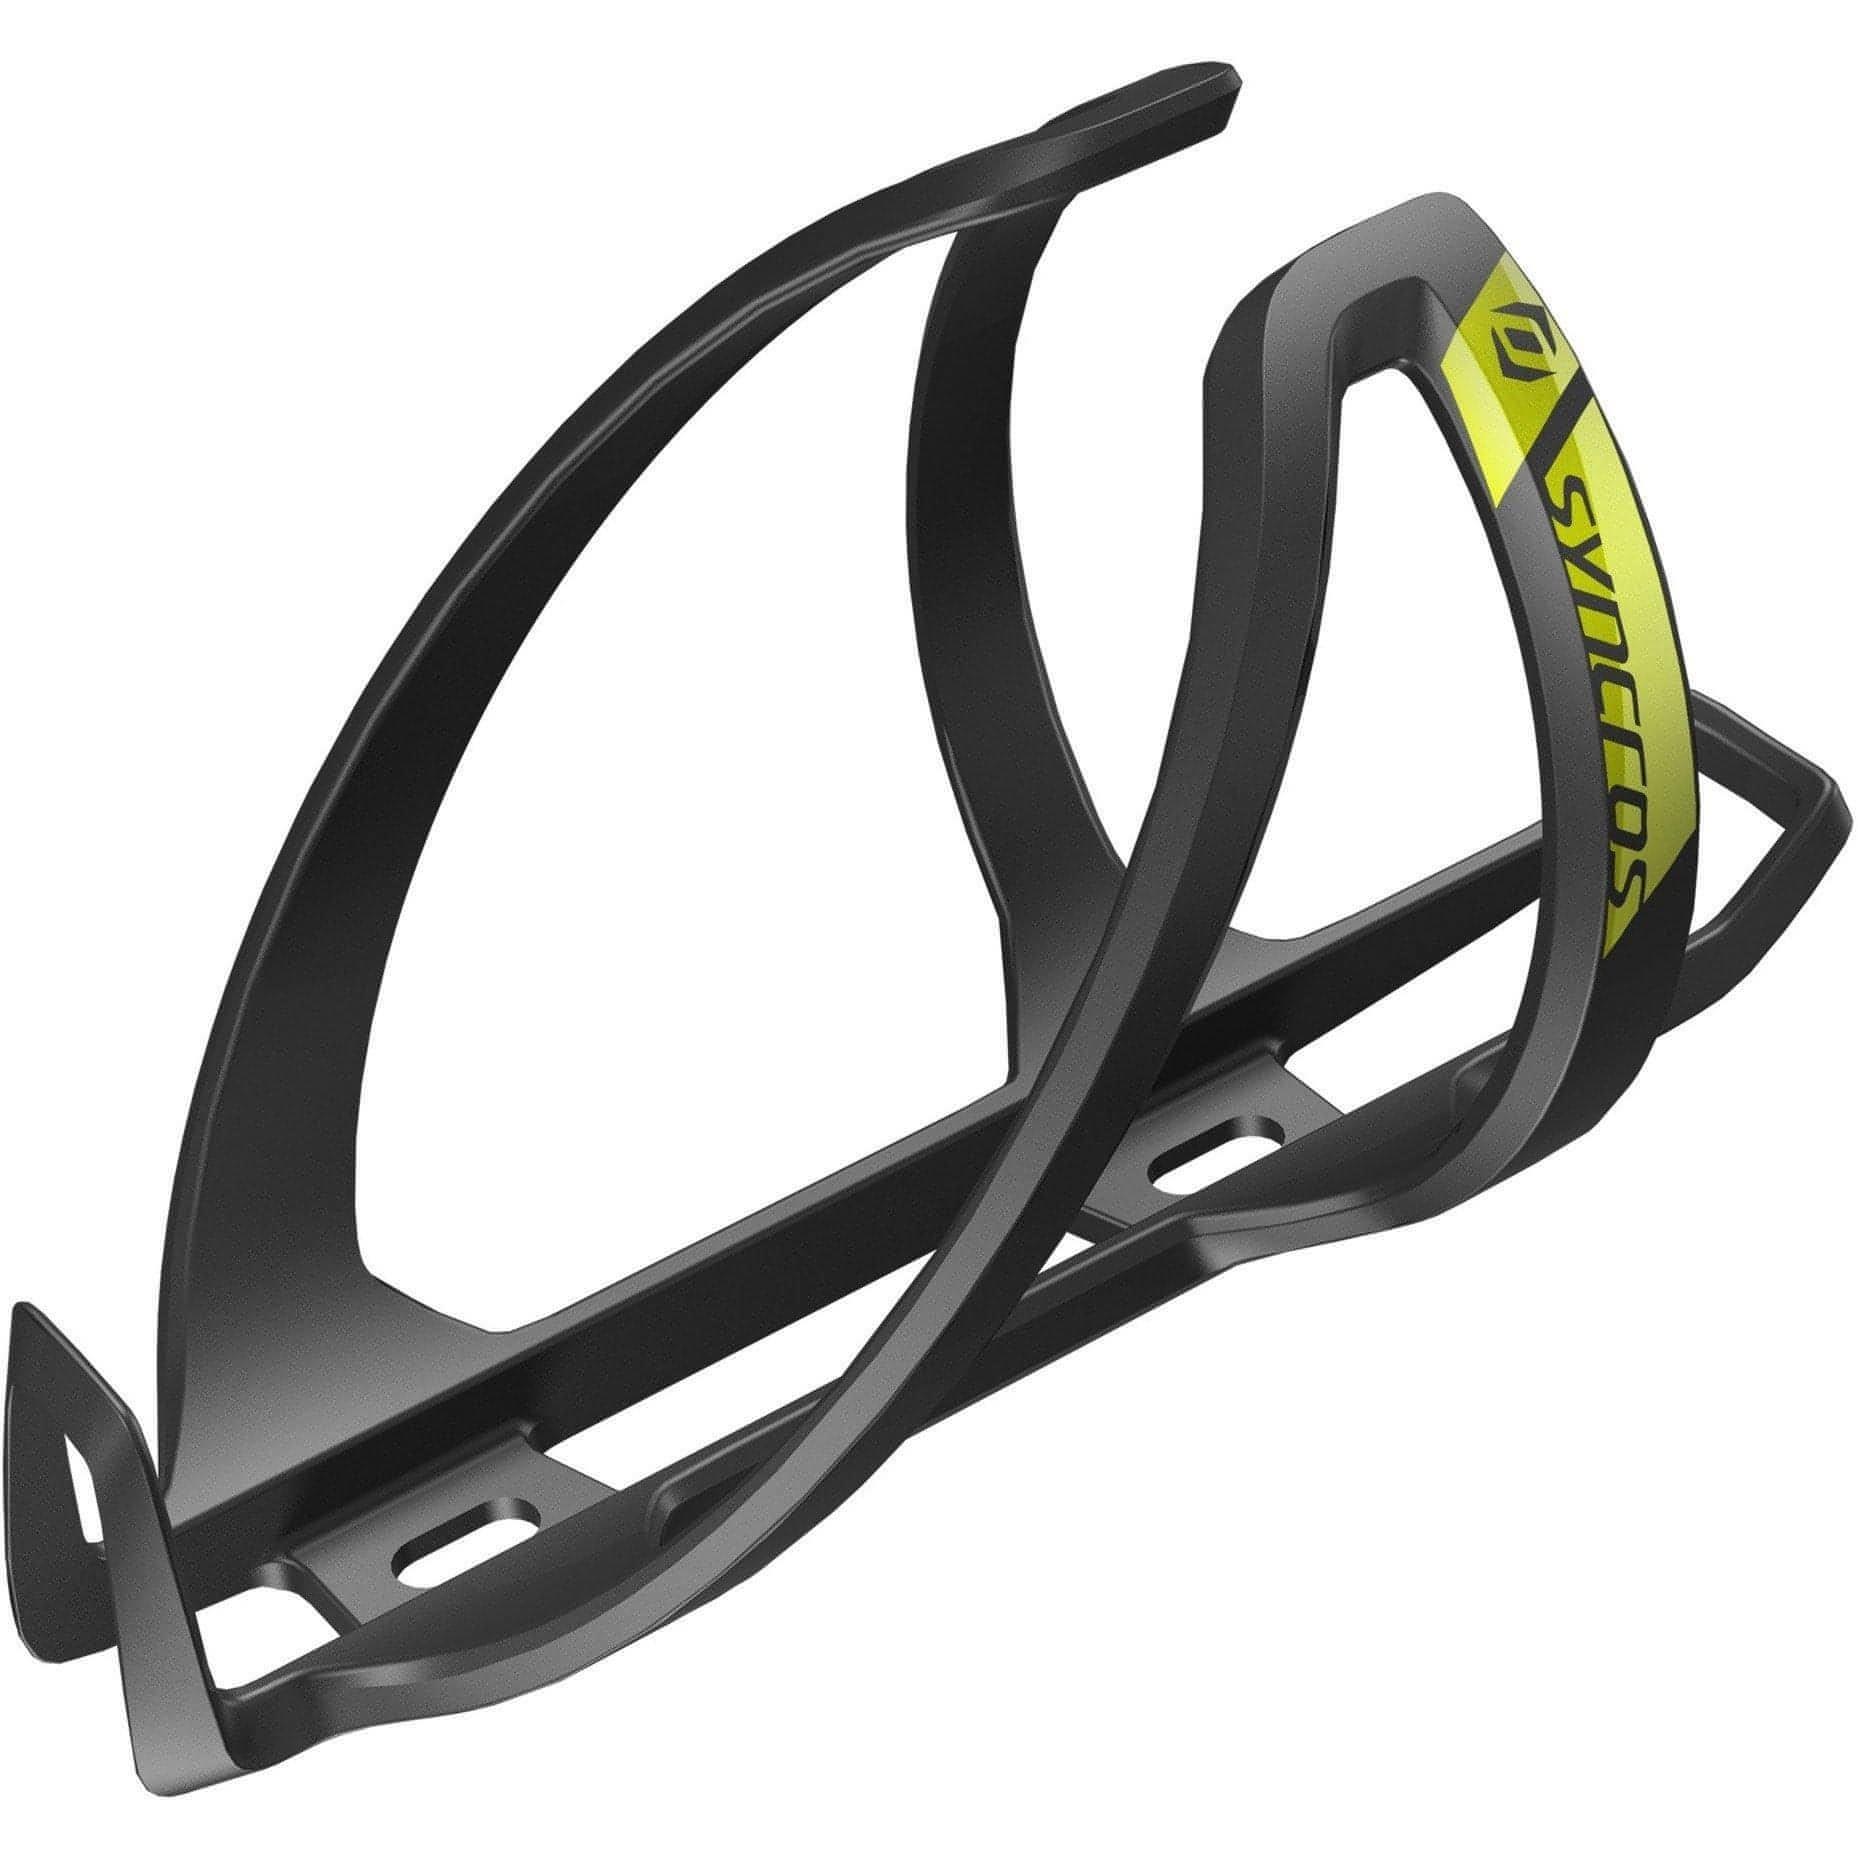 Syncros Coupe 2.0 Bottle Cage - Black-Yellow 7613368787600 - Start Fitness